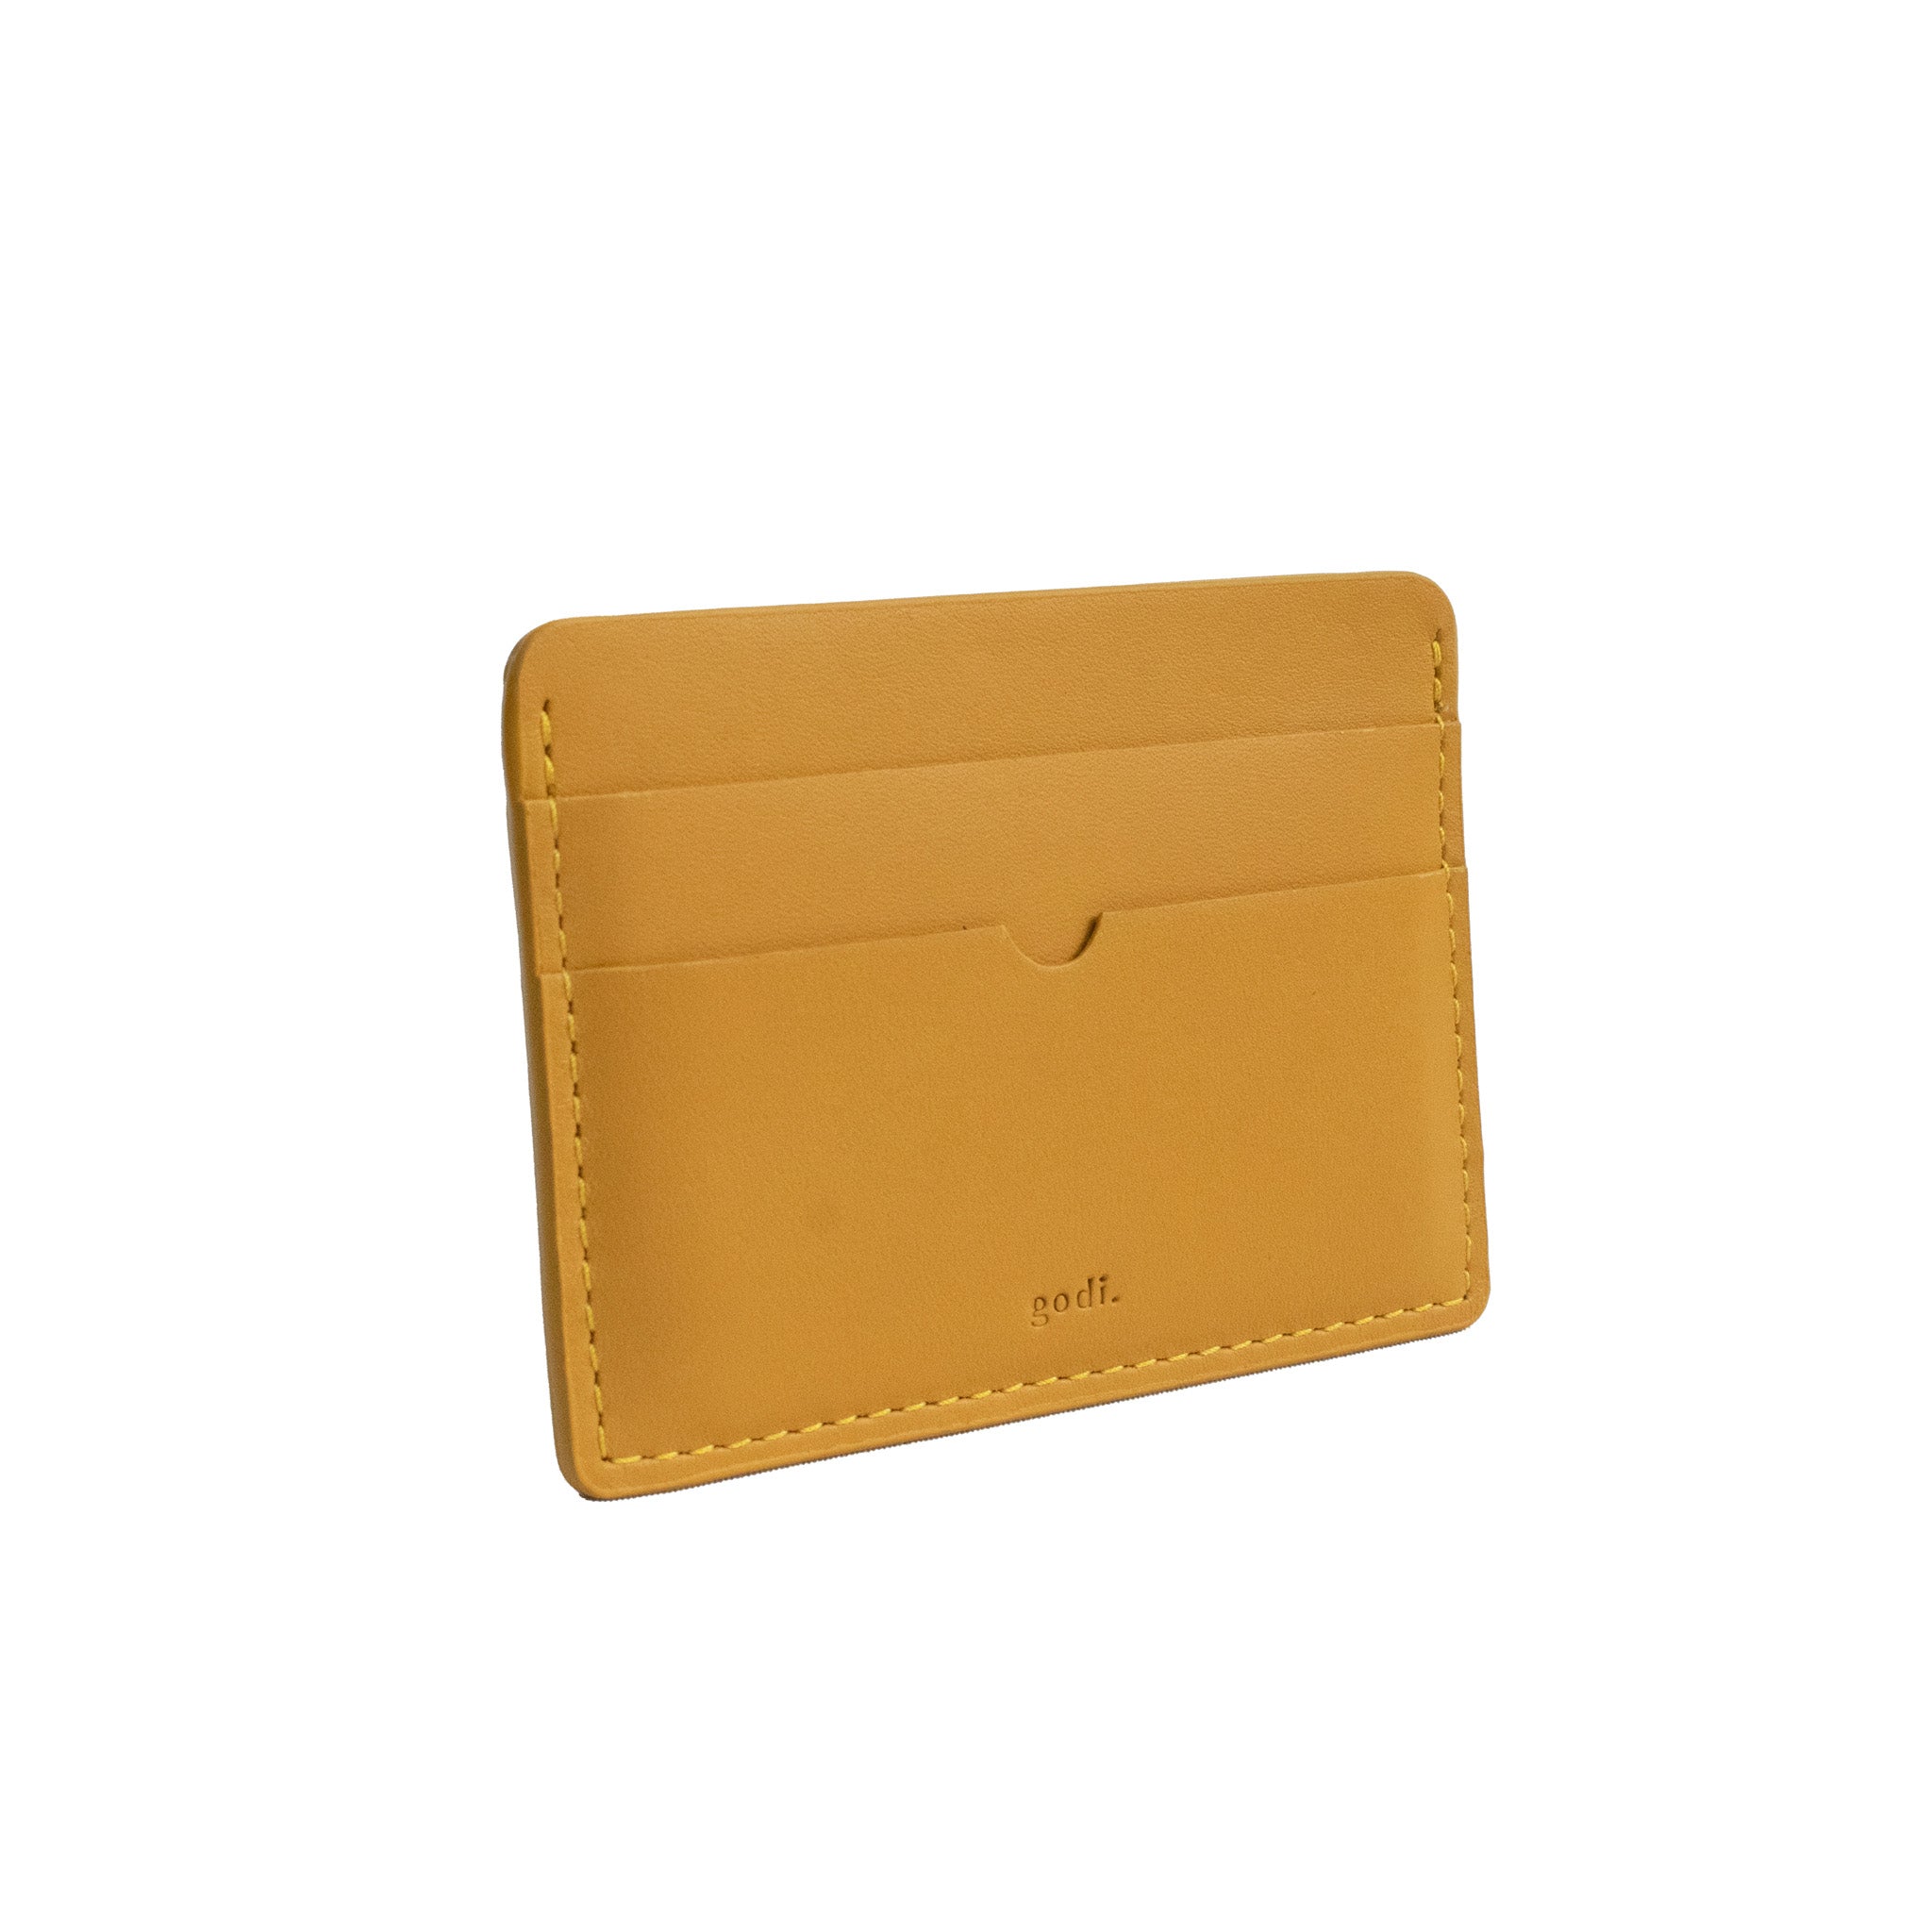 Card Case in Amber Yellow